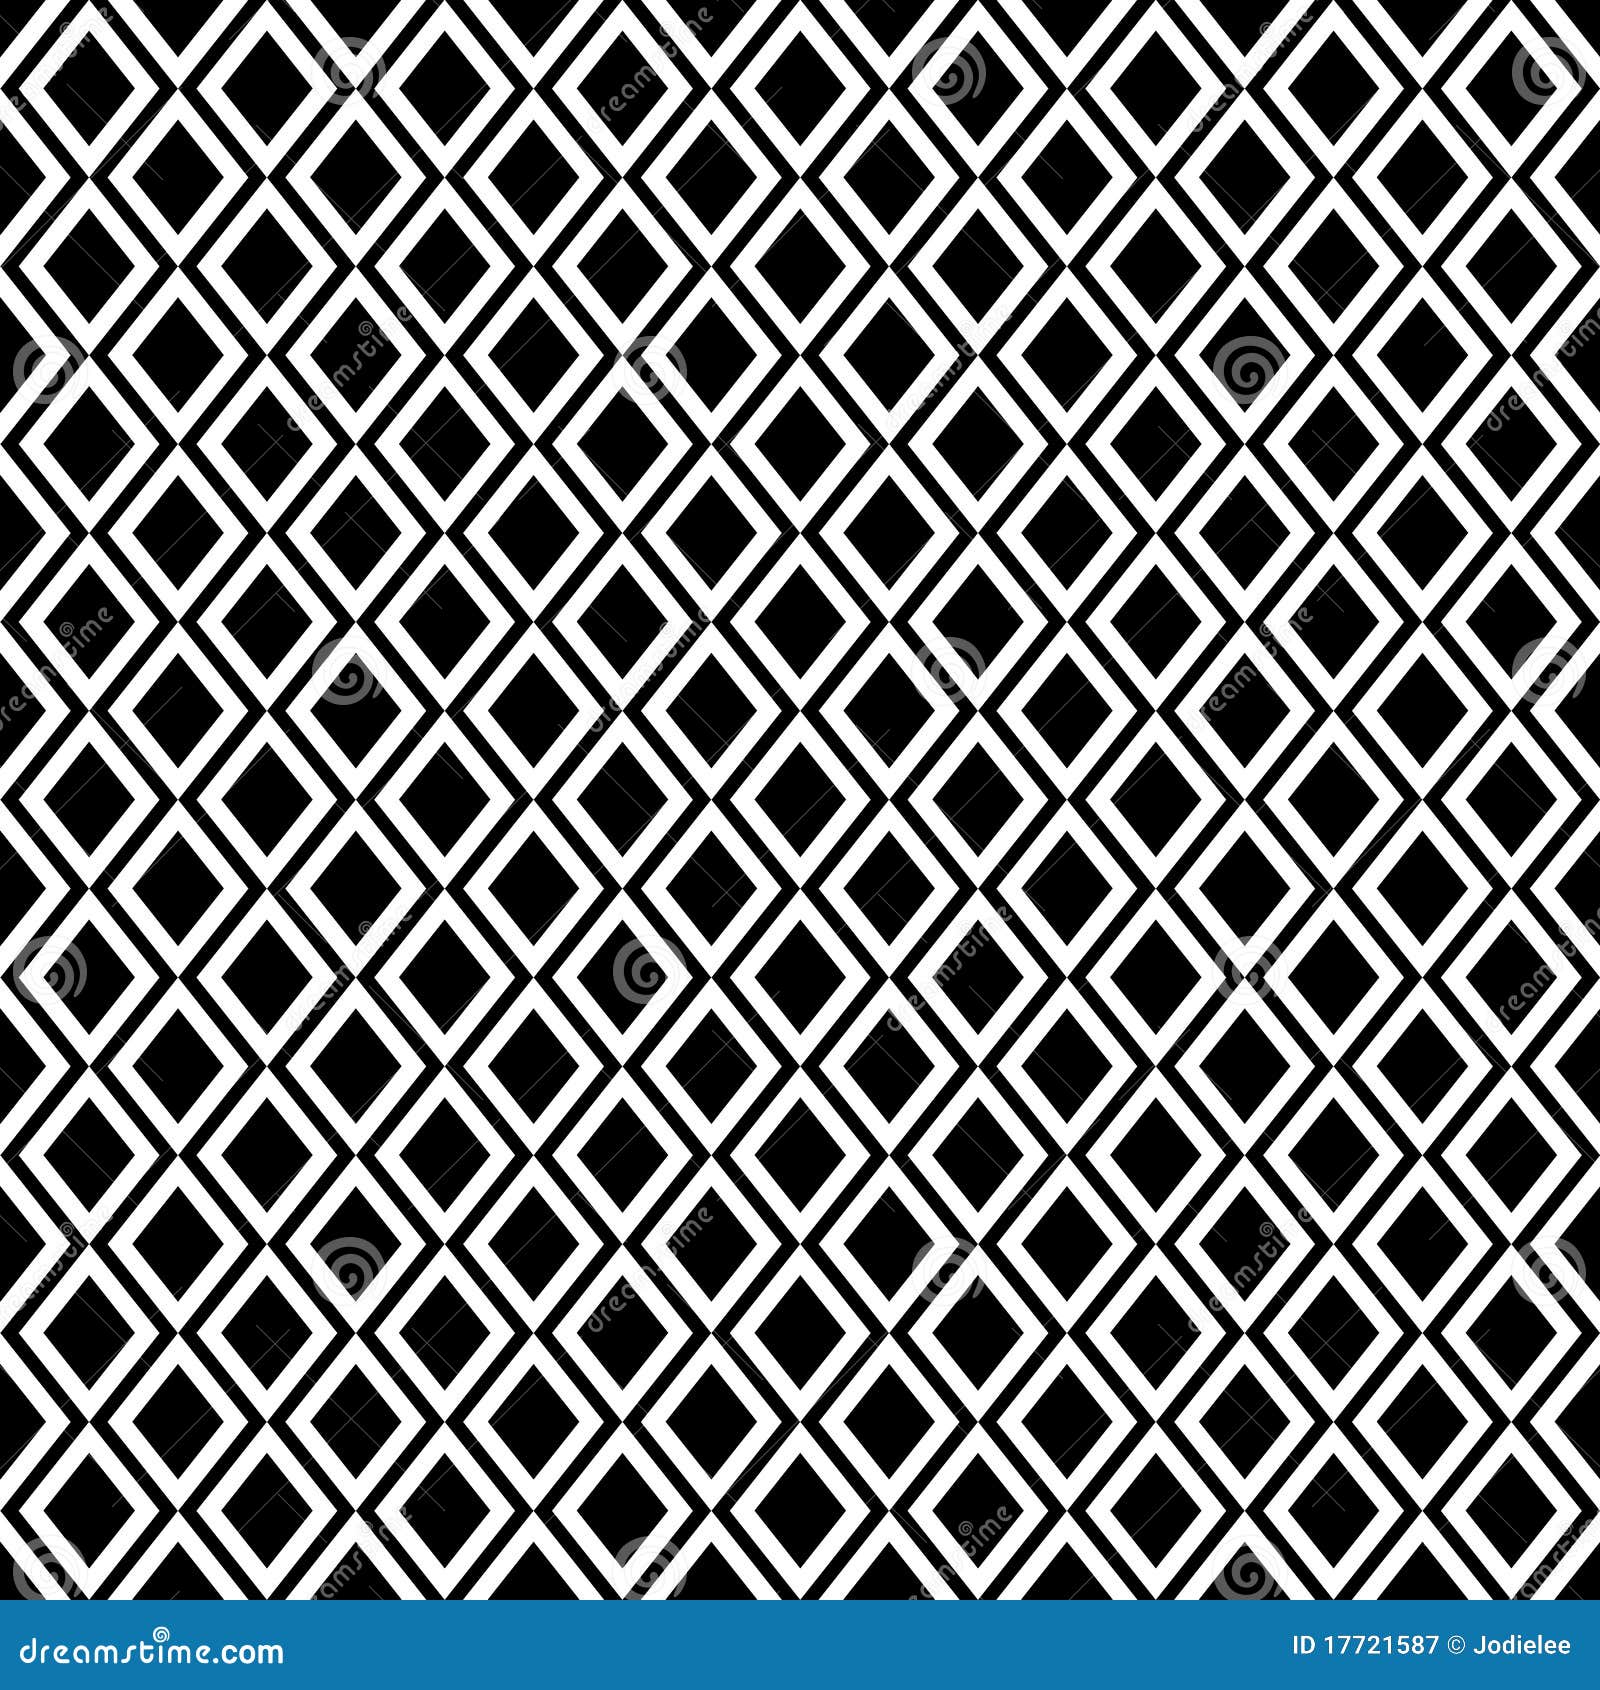 Diamond Vector Repeat Tiled Pattern Royalty Free Stock Photography 